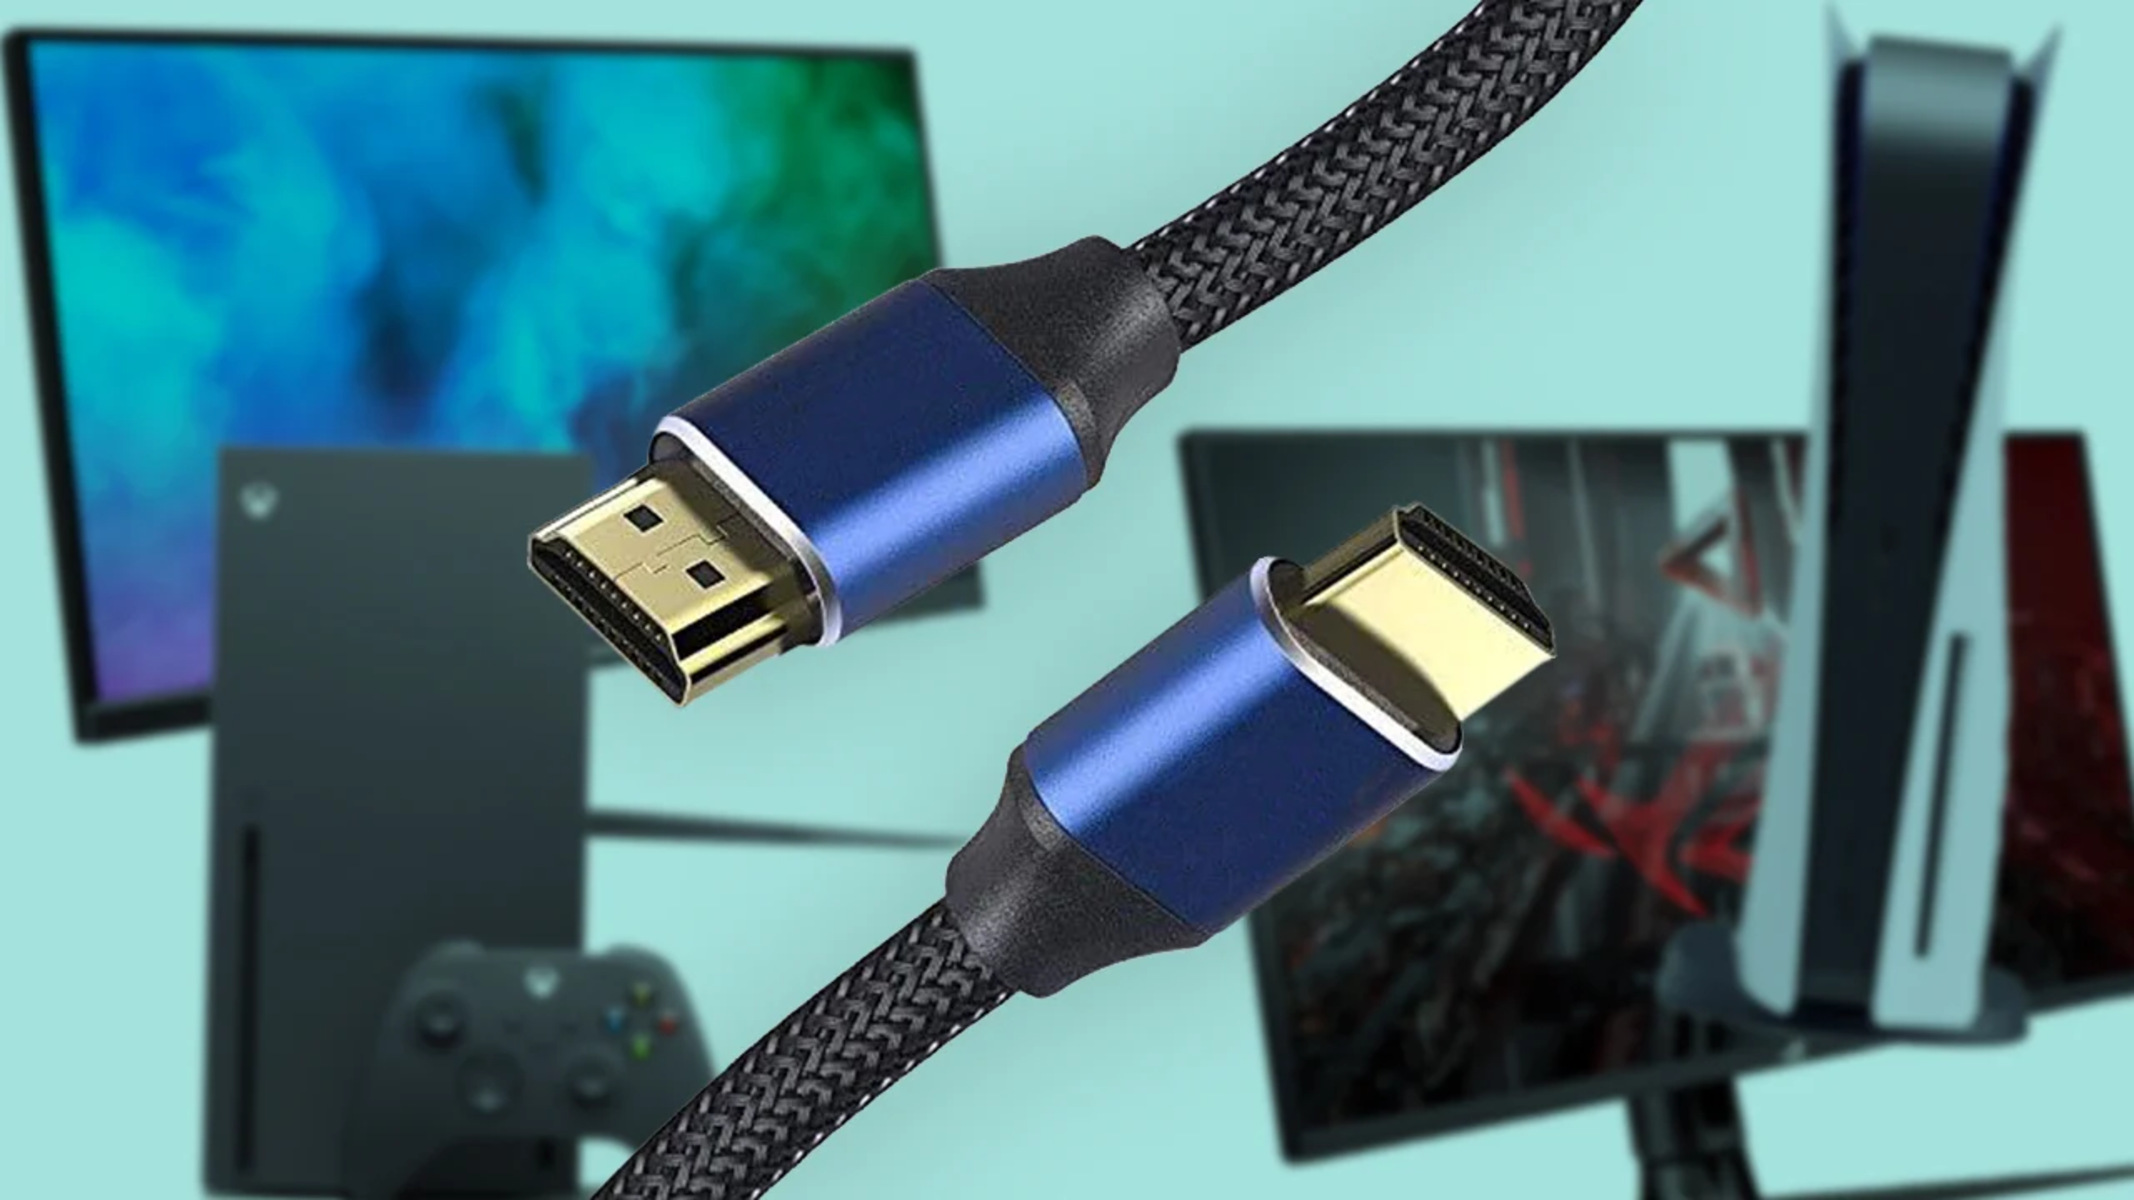 Make sure the HDMI cable is securely connected to both the monitor and the device (e.g., computer, game console).
Check if the HDMI cable is properly inserted into the correct HDMI port on the monitor and the device.